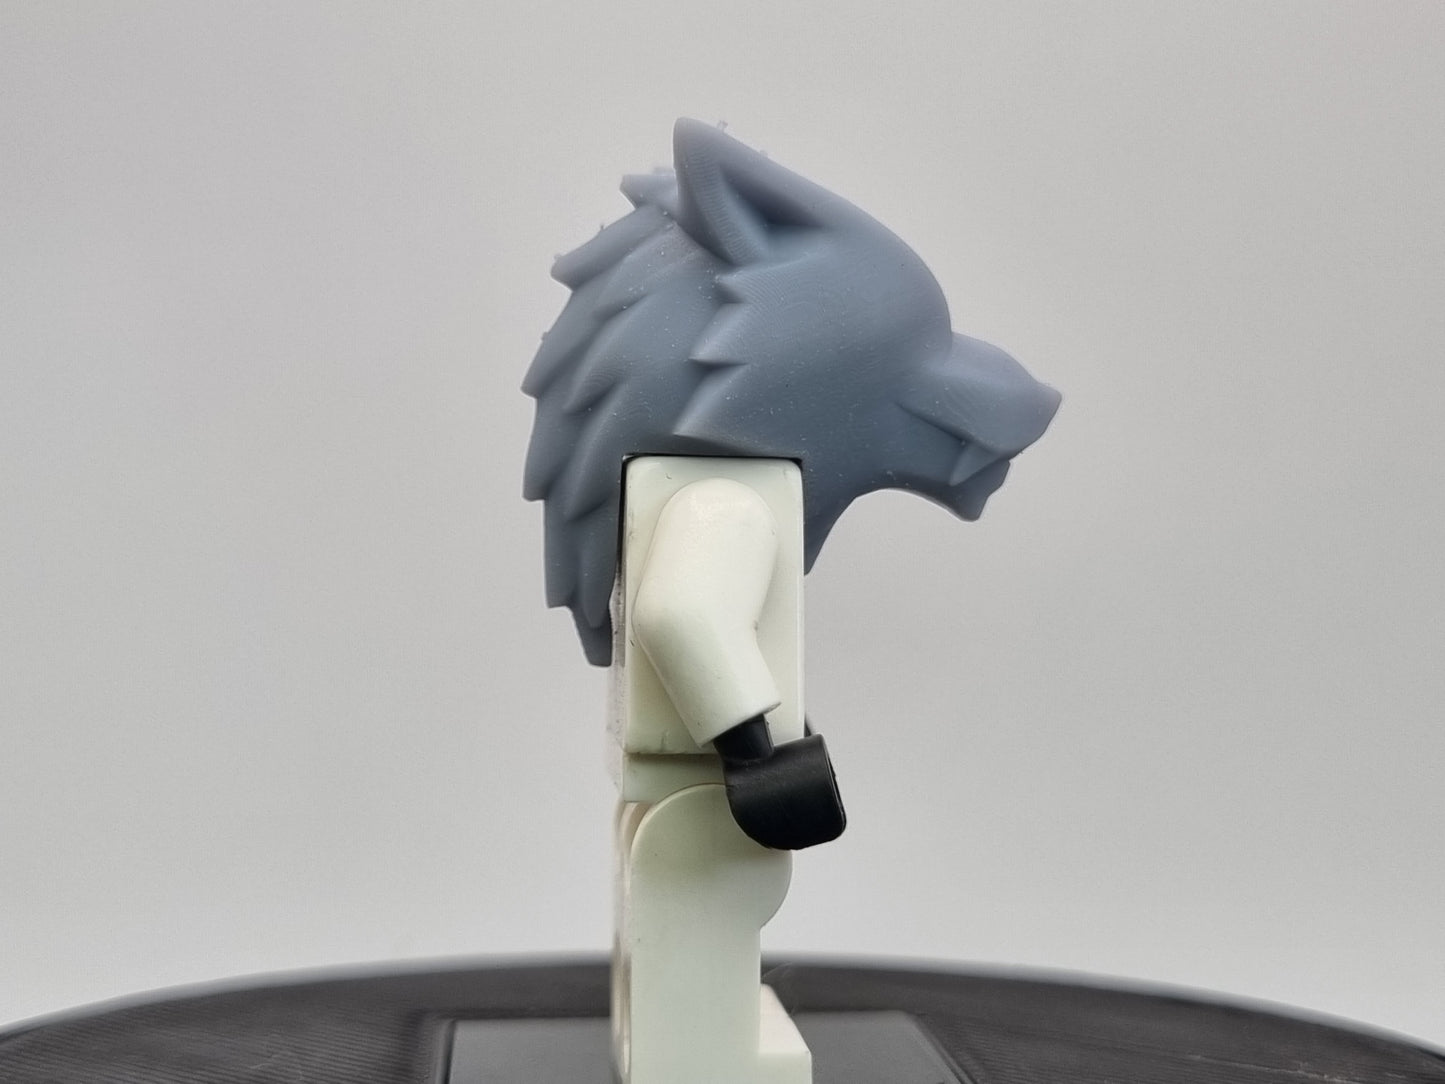 lego compatible 3D printed wolf head!